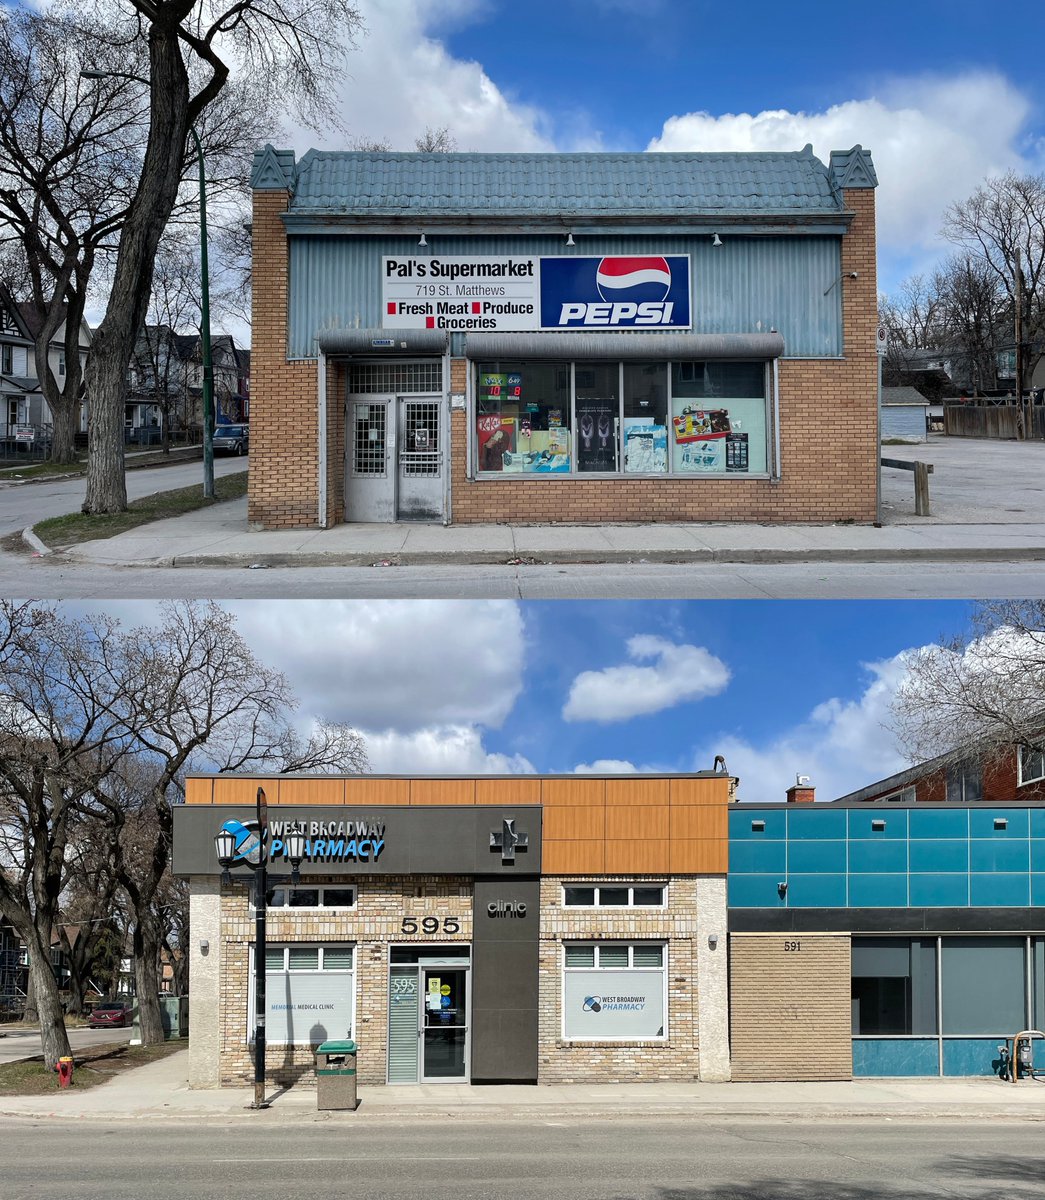 Winnipeg was the first city in Canada to have Safeway grocery stores. The company built 8 identical stores that all opened on October 18, 1929. Amazingly 5 of the buildings still exist. 2/14110 Sherbrook (store #1)247 Lilac535 Osborne719 St. Matthews595 Broadway